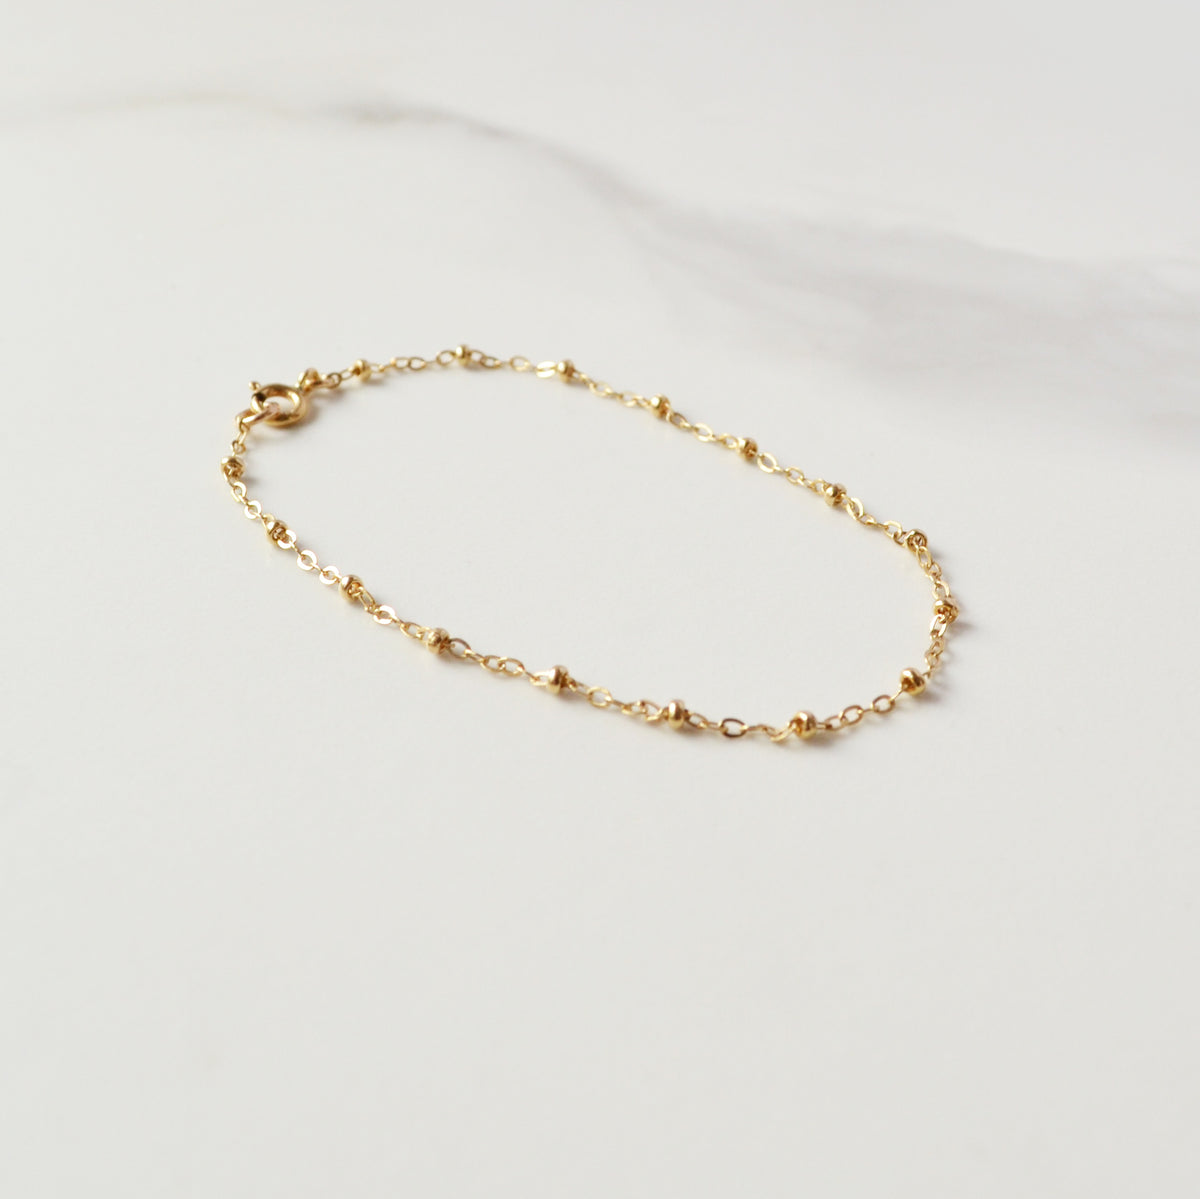 Ball and Chain Bracelet, Gold or Silver